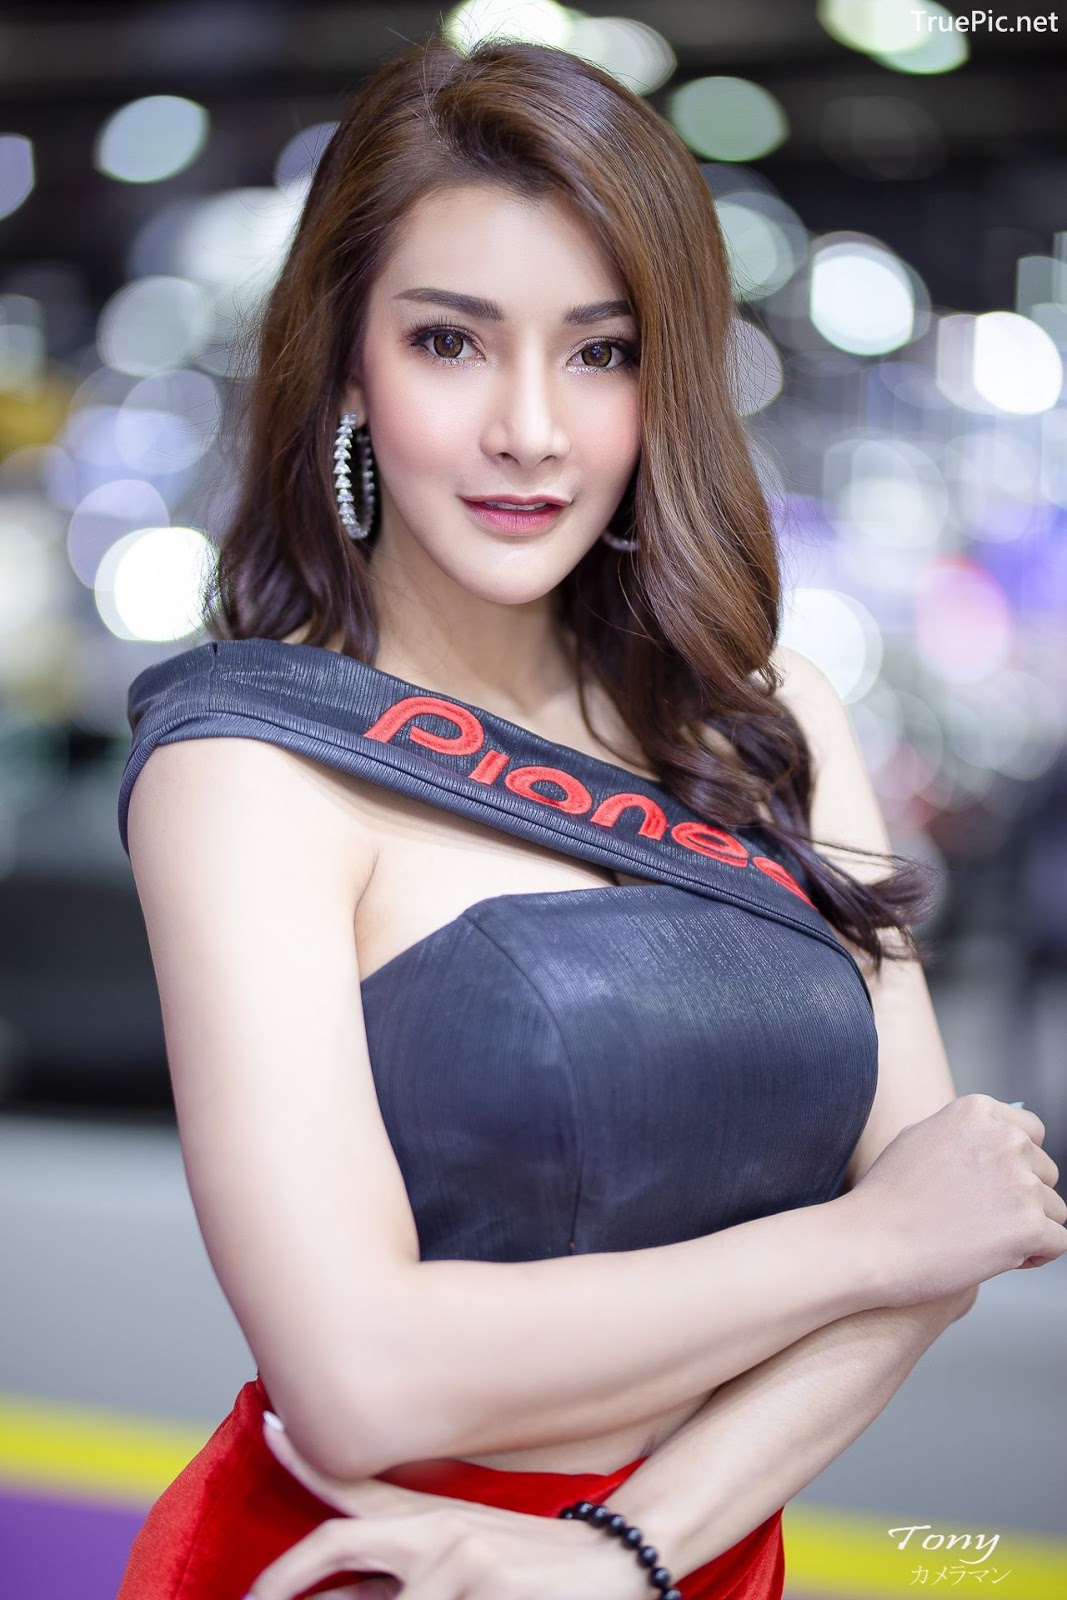 Image-Thailand-Hot-Model-Thai-Racing-Girl-At-Motor-Expo-2019-TruePic.net- Picture-115